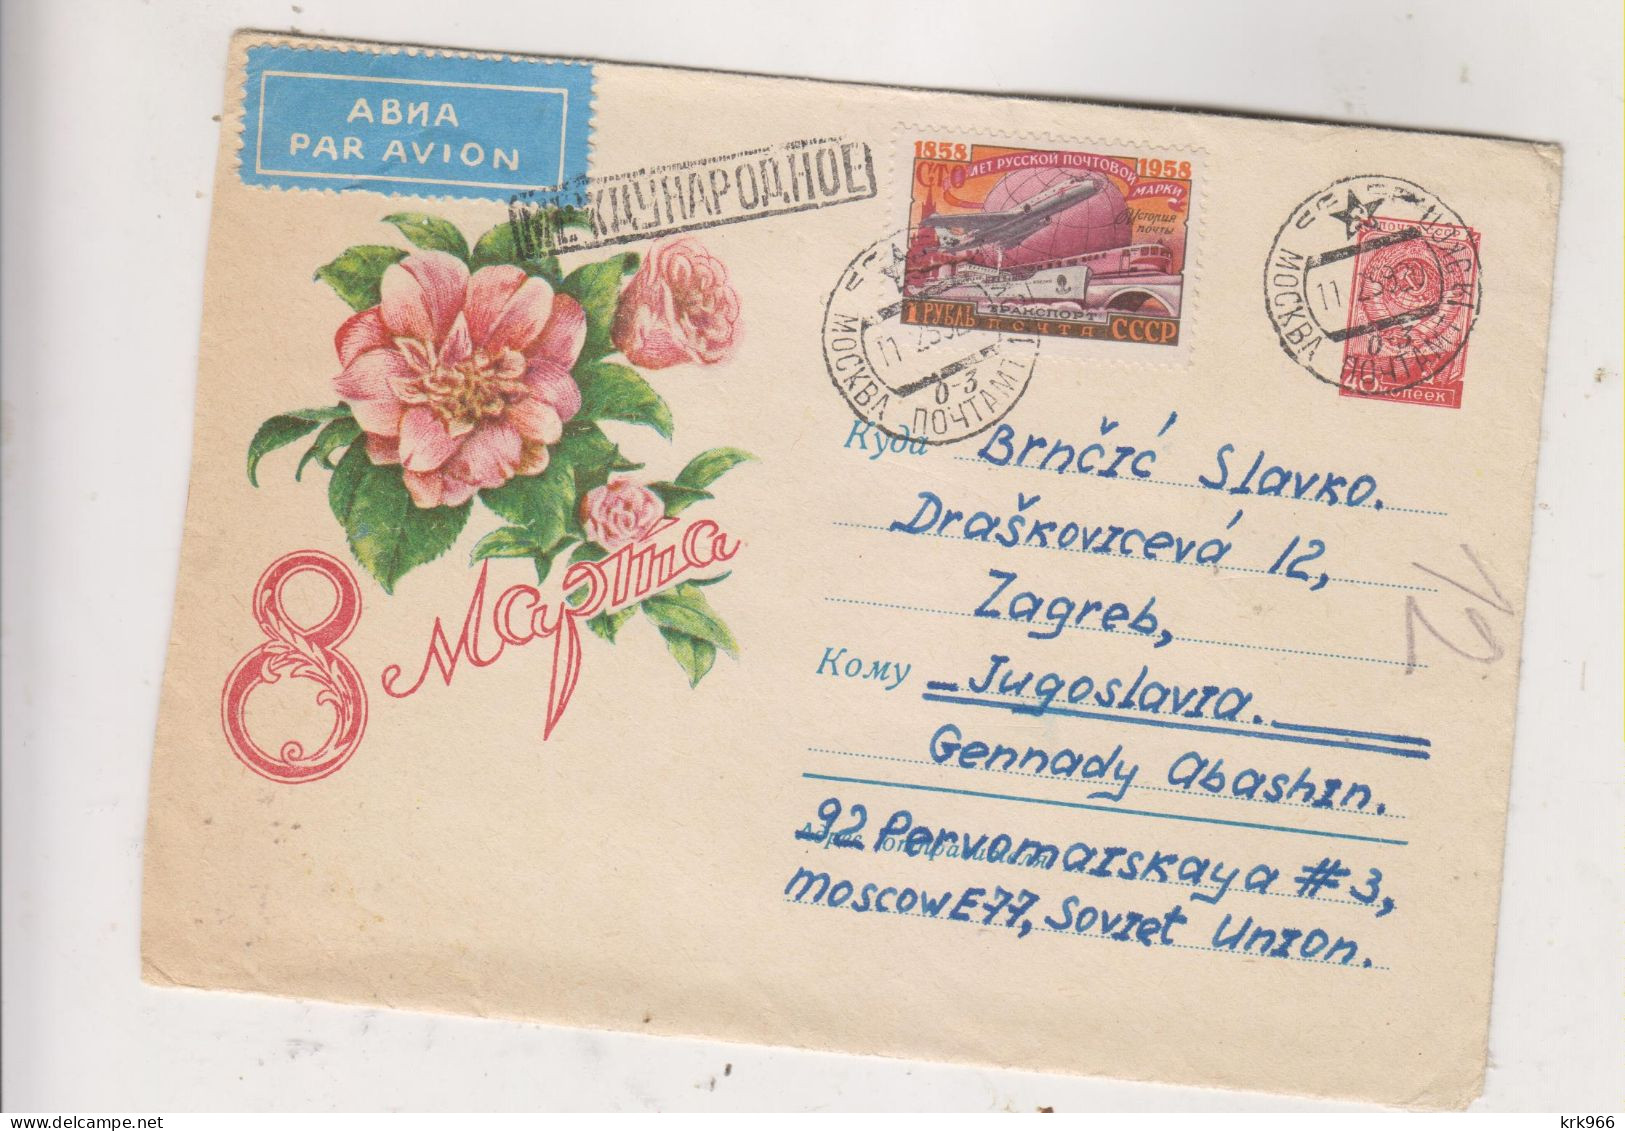 RUSSIA, 1959   Nice Airmail Postal Stationery Cover  To Yugoslavia - 1950-59